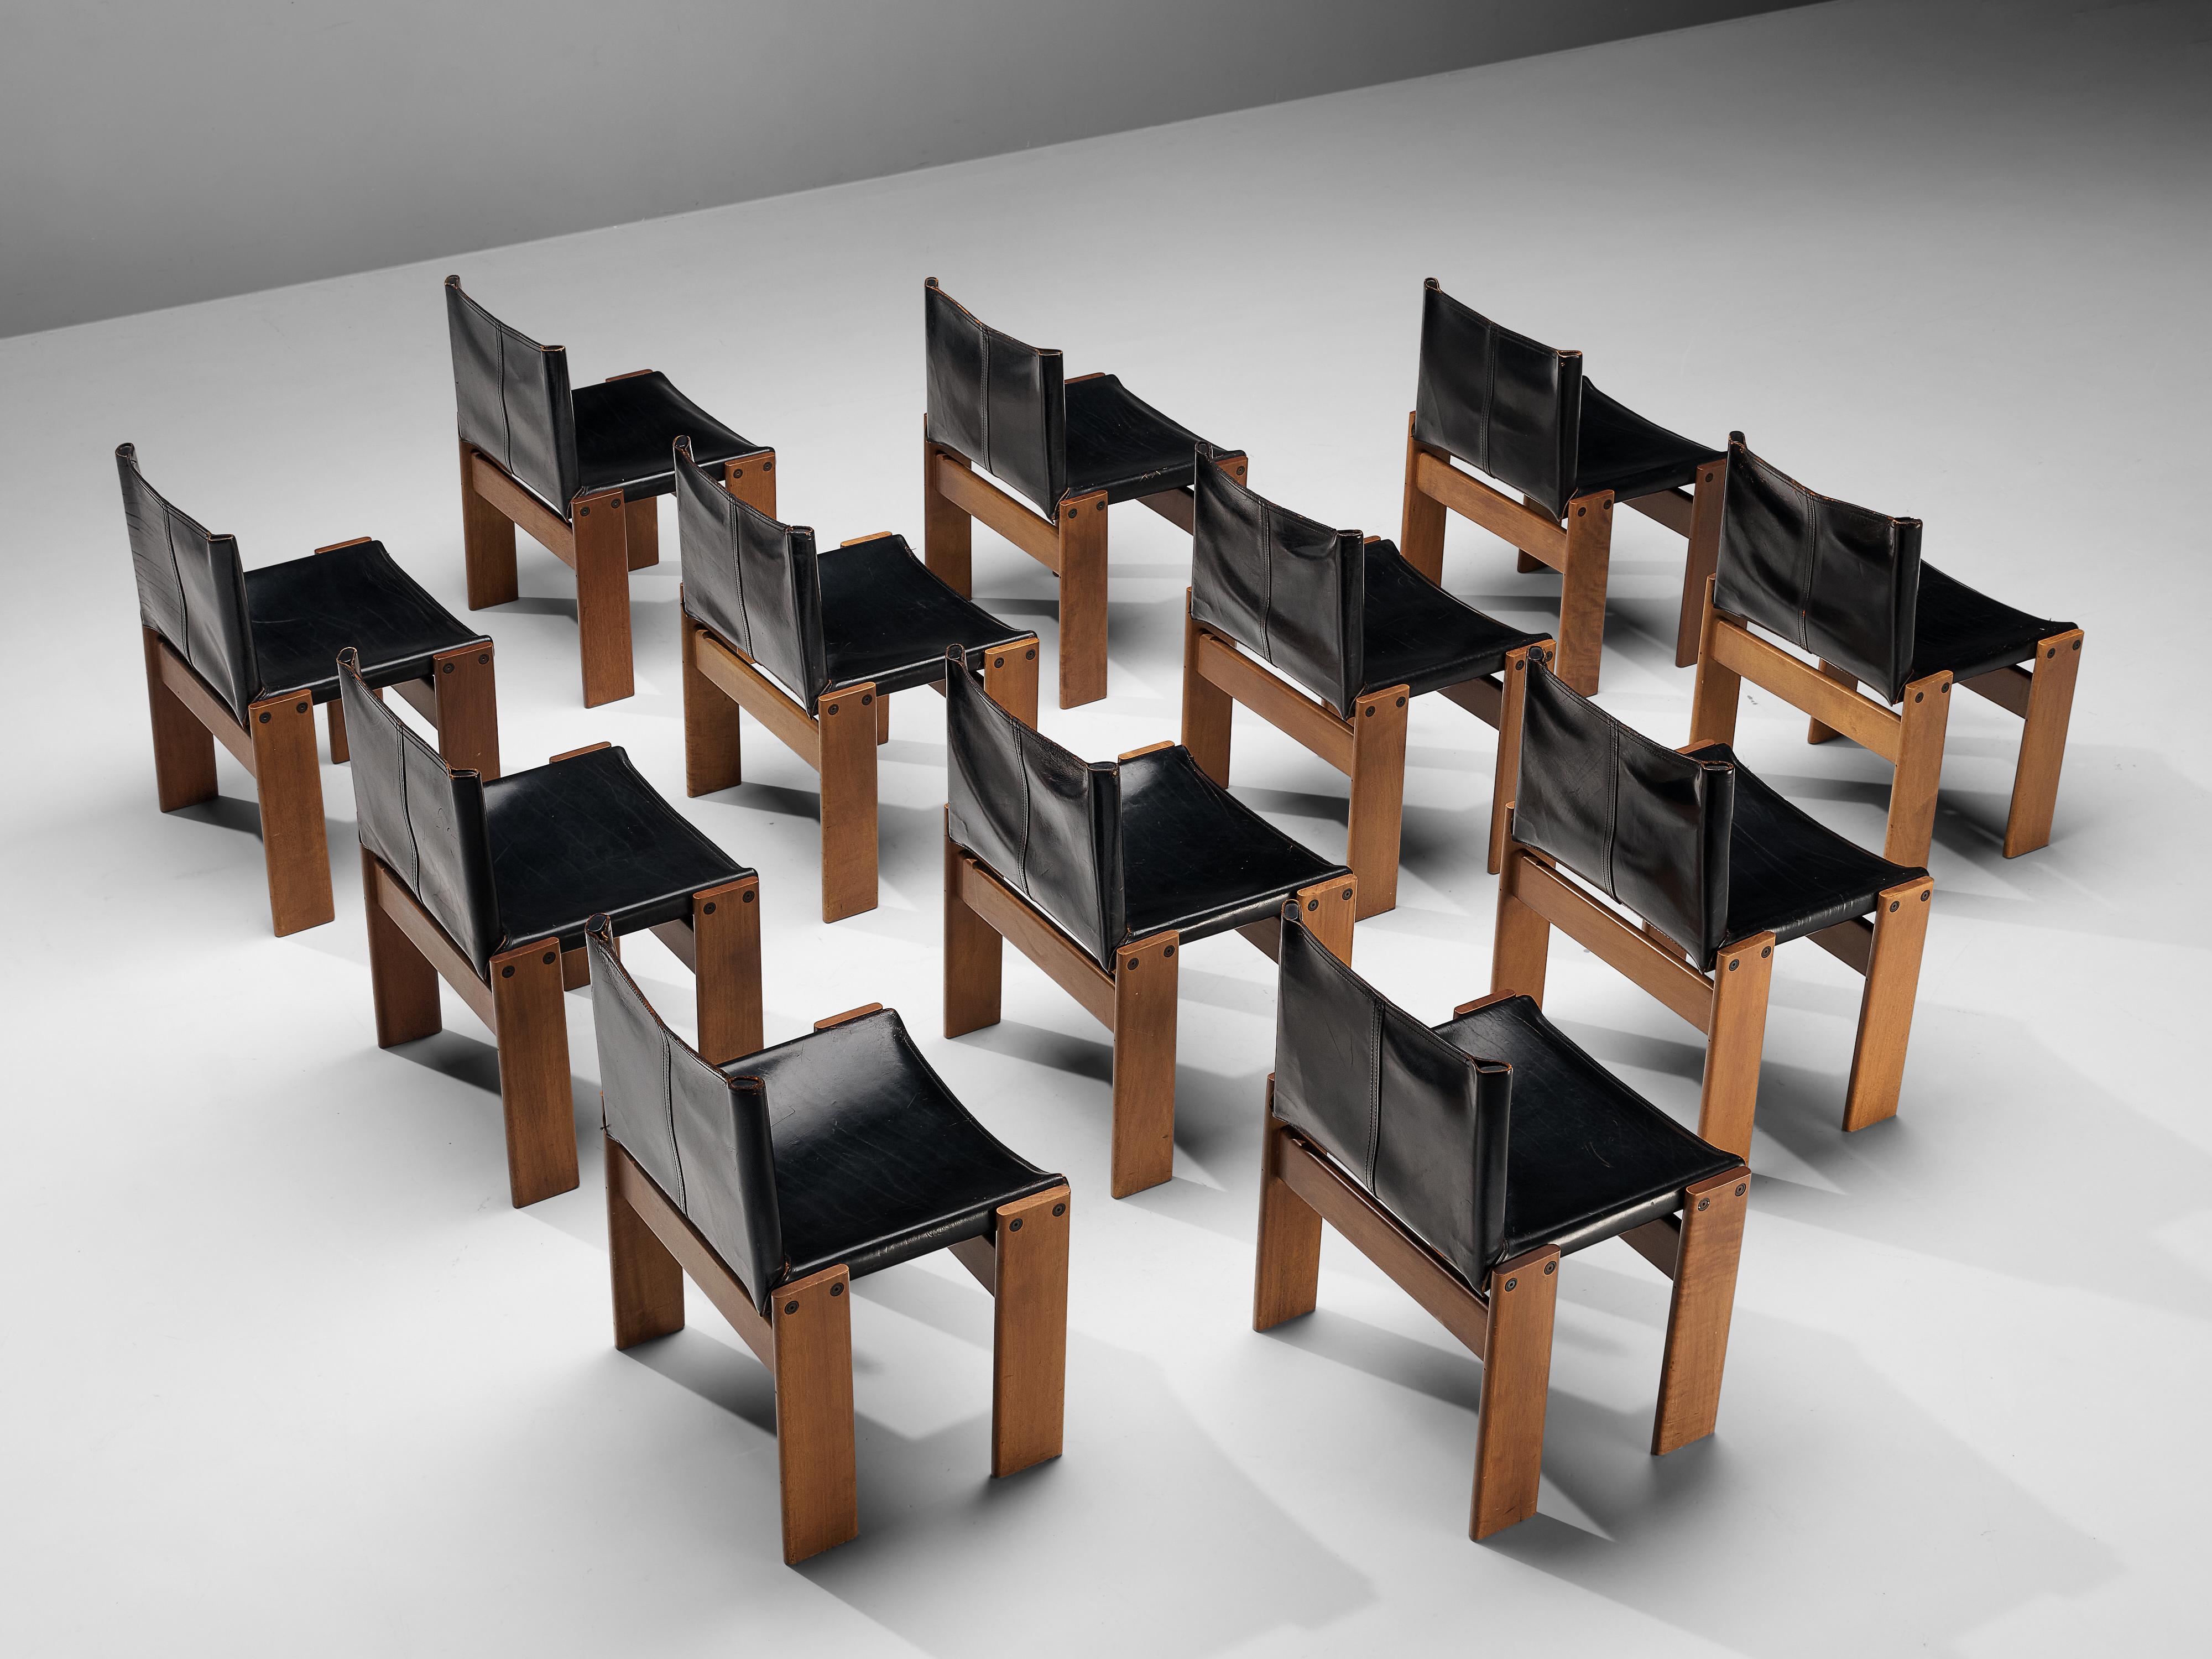 Afra & Tobia Scarpa for Molteni, dining chairs model 'Monk', beech, black leather, Italy, designed in 1974 

'Monk' dinign chairs by Italian designers Afra & Tobia Scarpa. The black leather forms a striking combination with the wood. Interesting